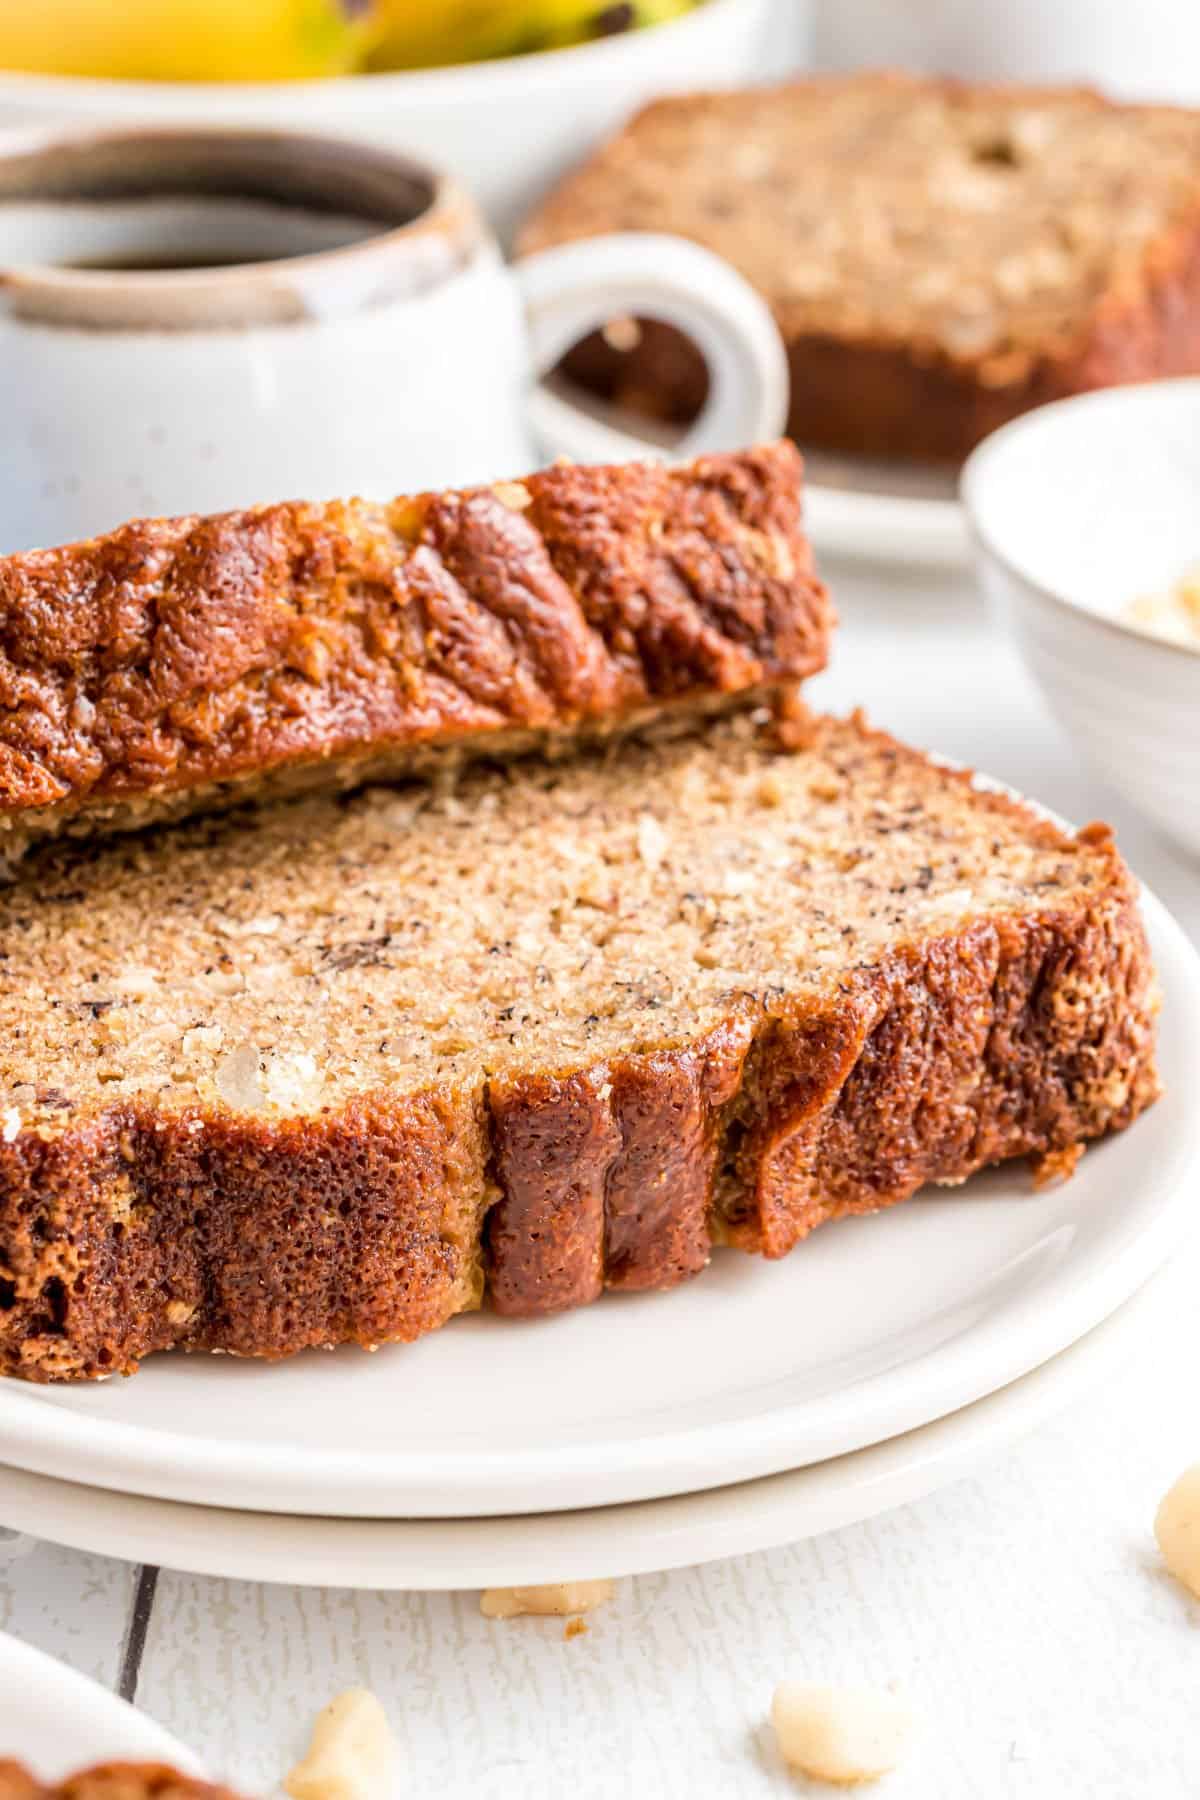 Two slices of coconut banana bread on a white plate.